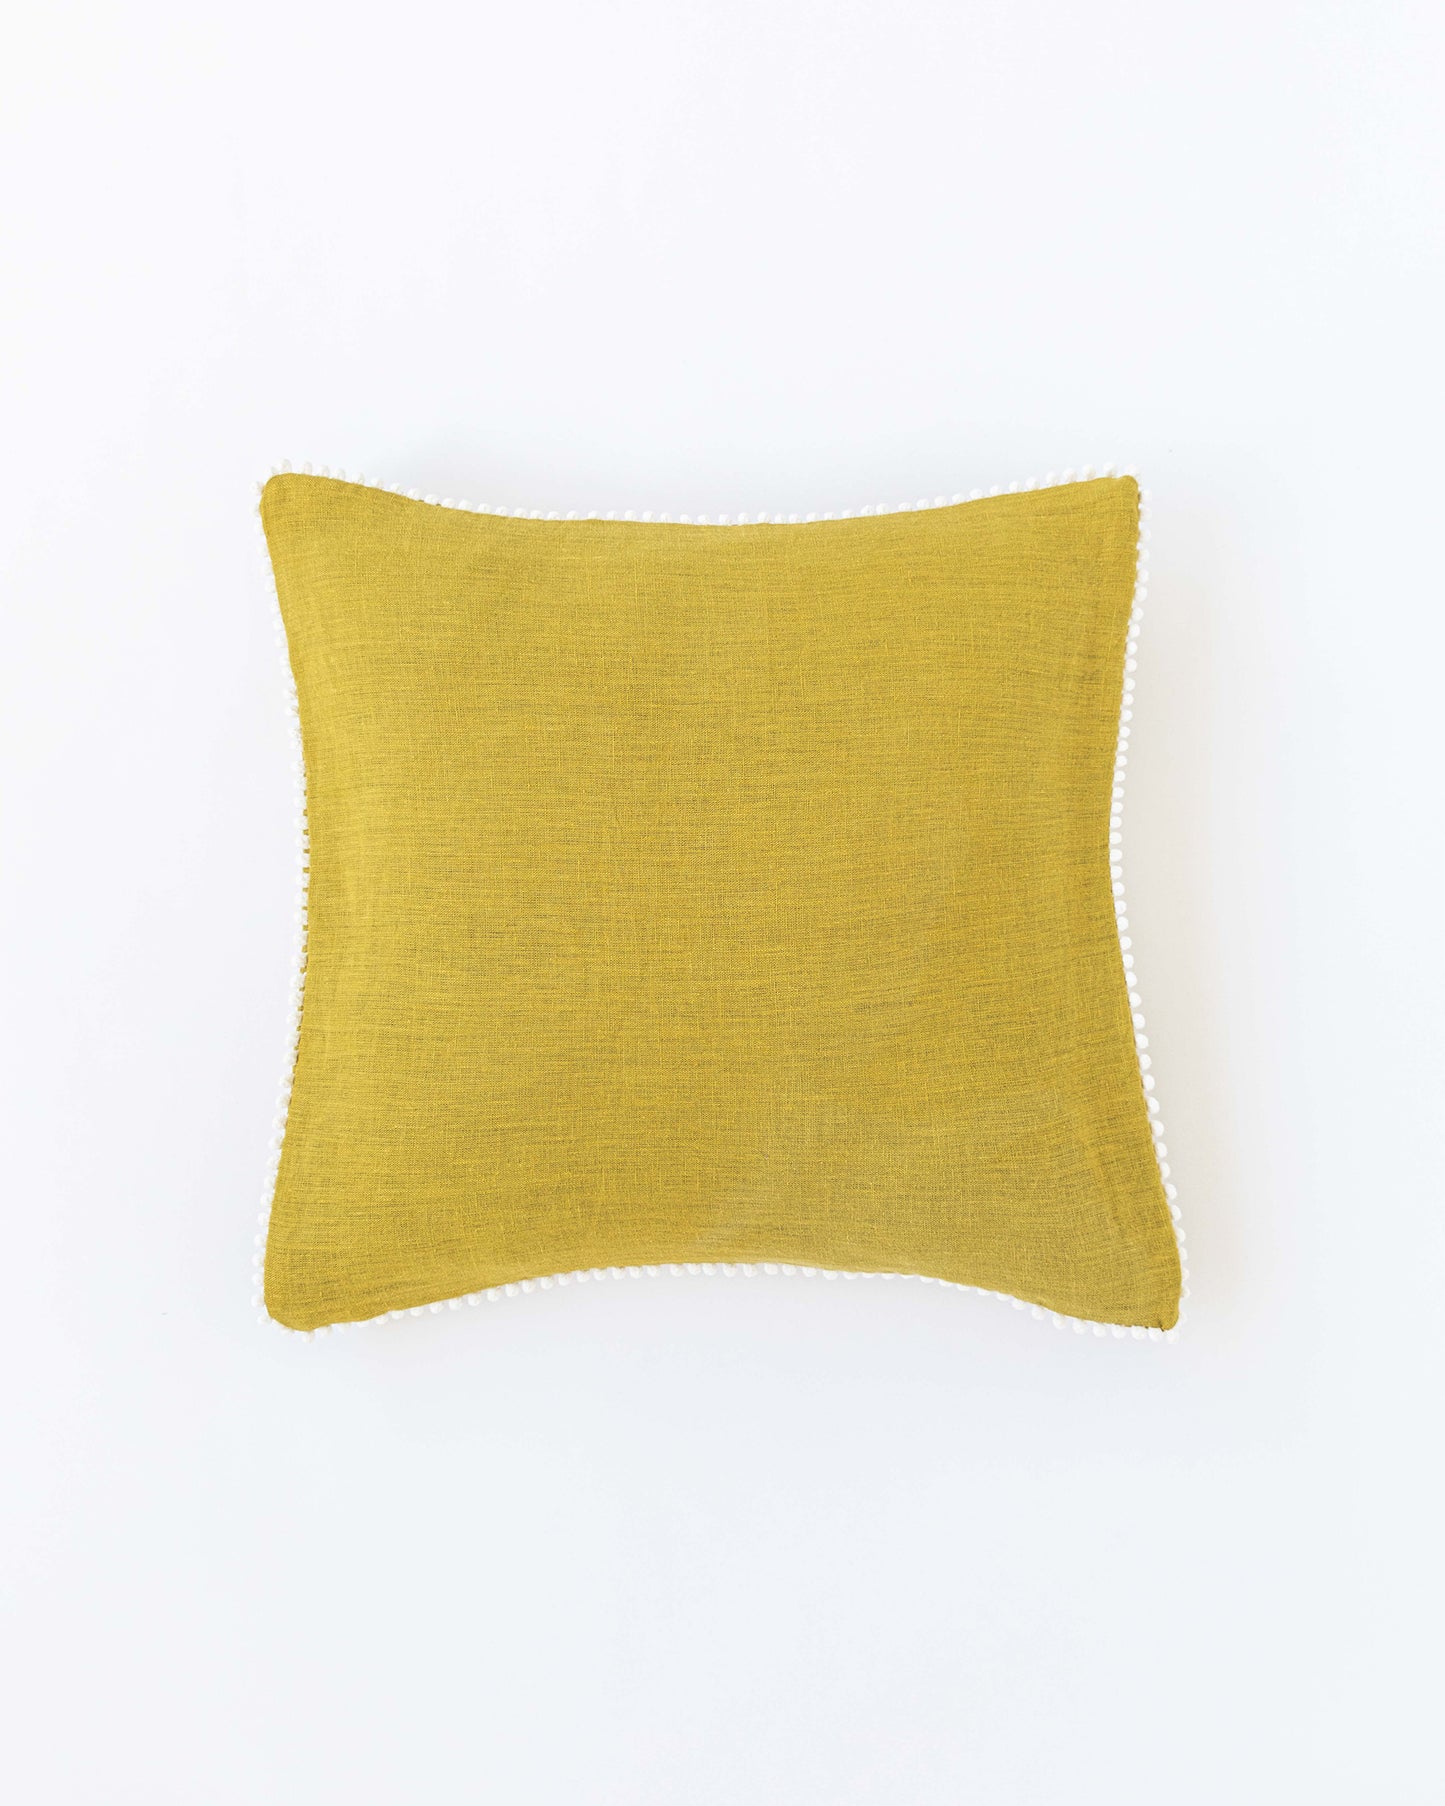 Cushion cover with pom poms in Moss yellow - MagicLinen